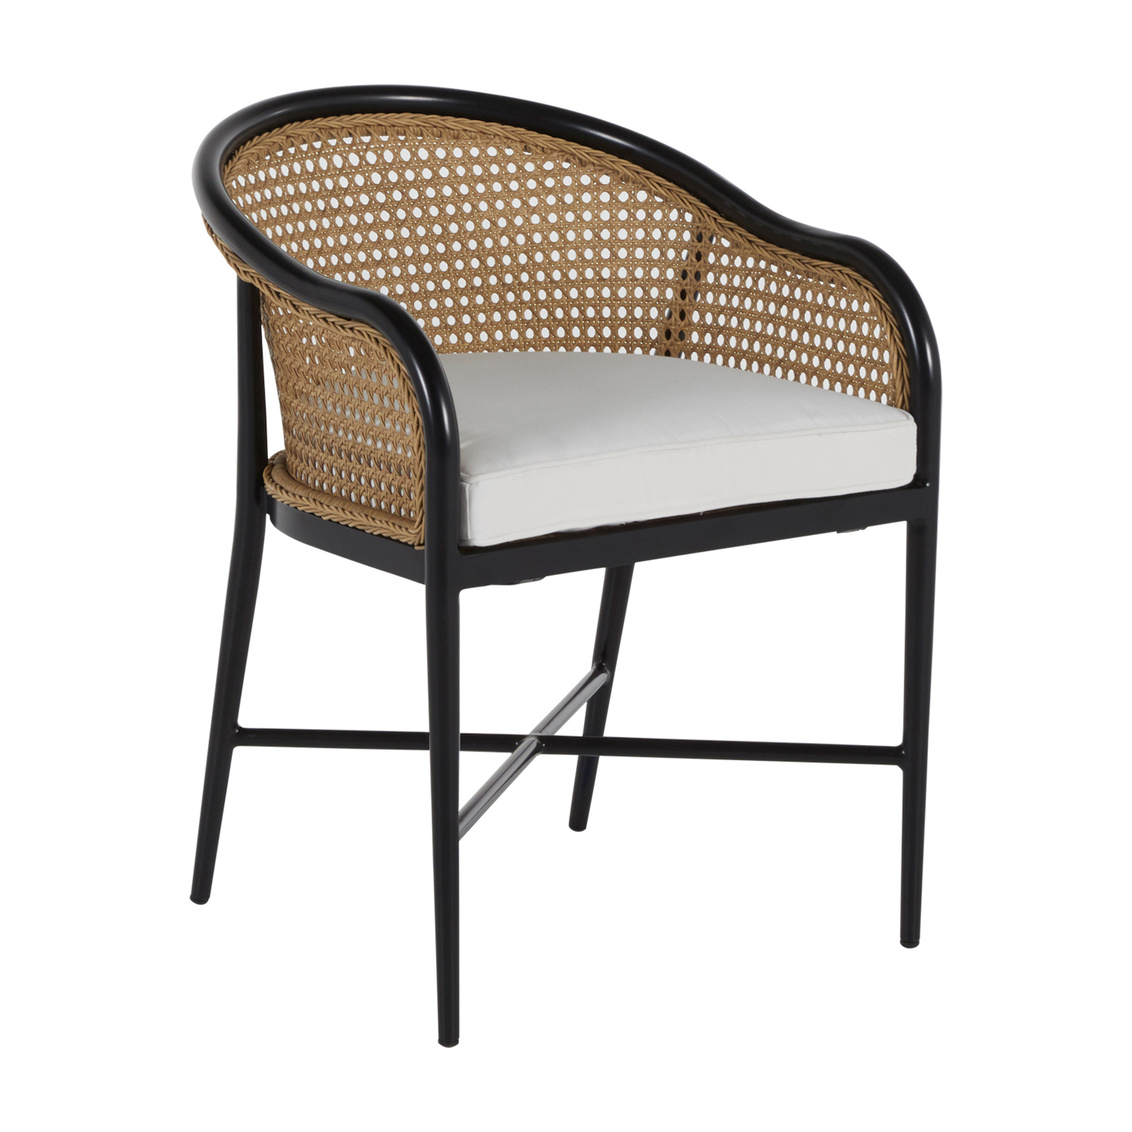 havana arm chair in black/natural resin – frame only product image